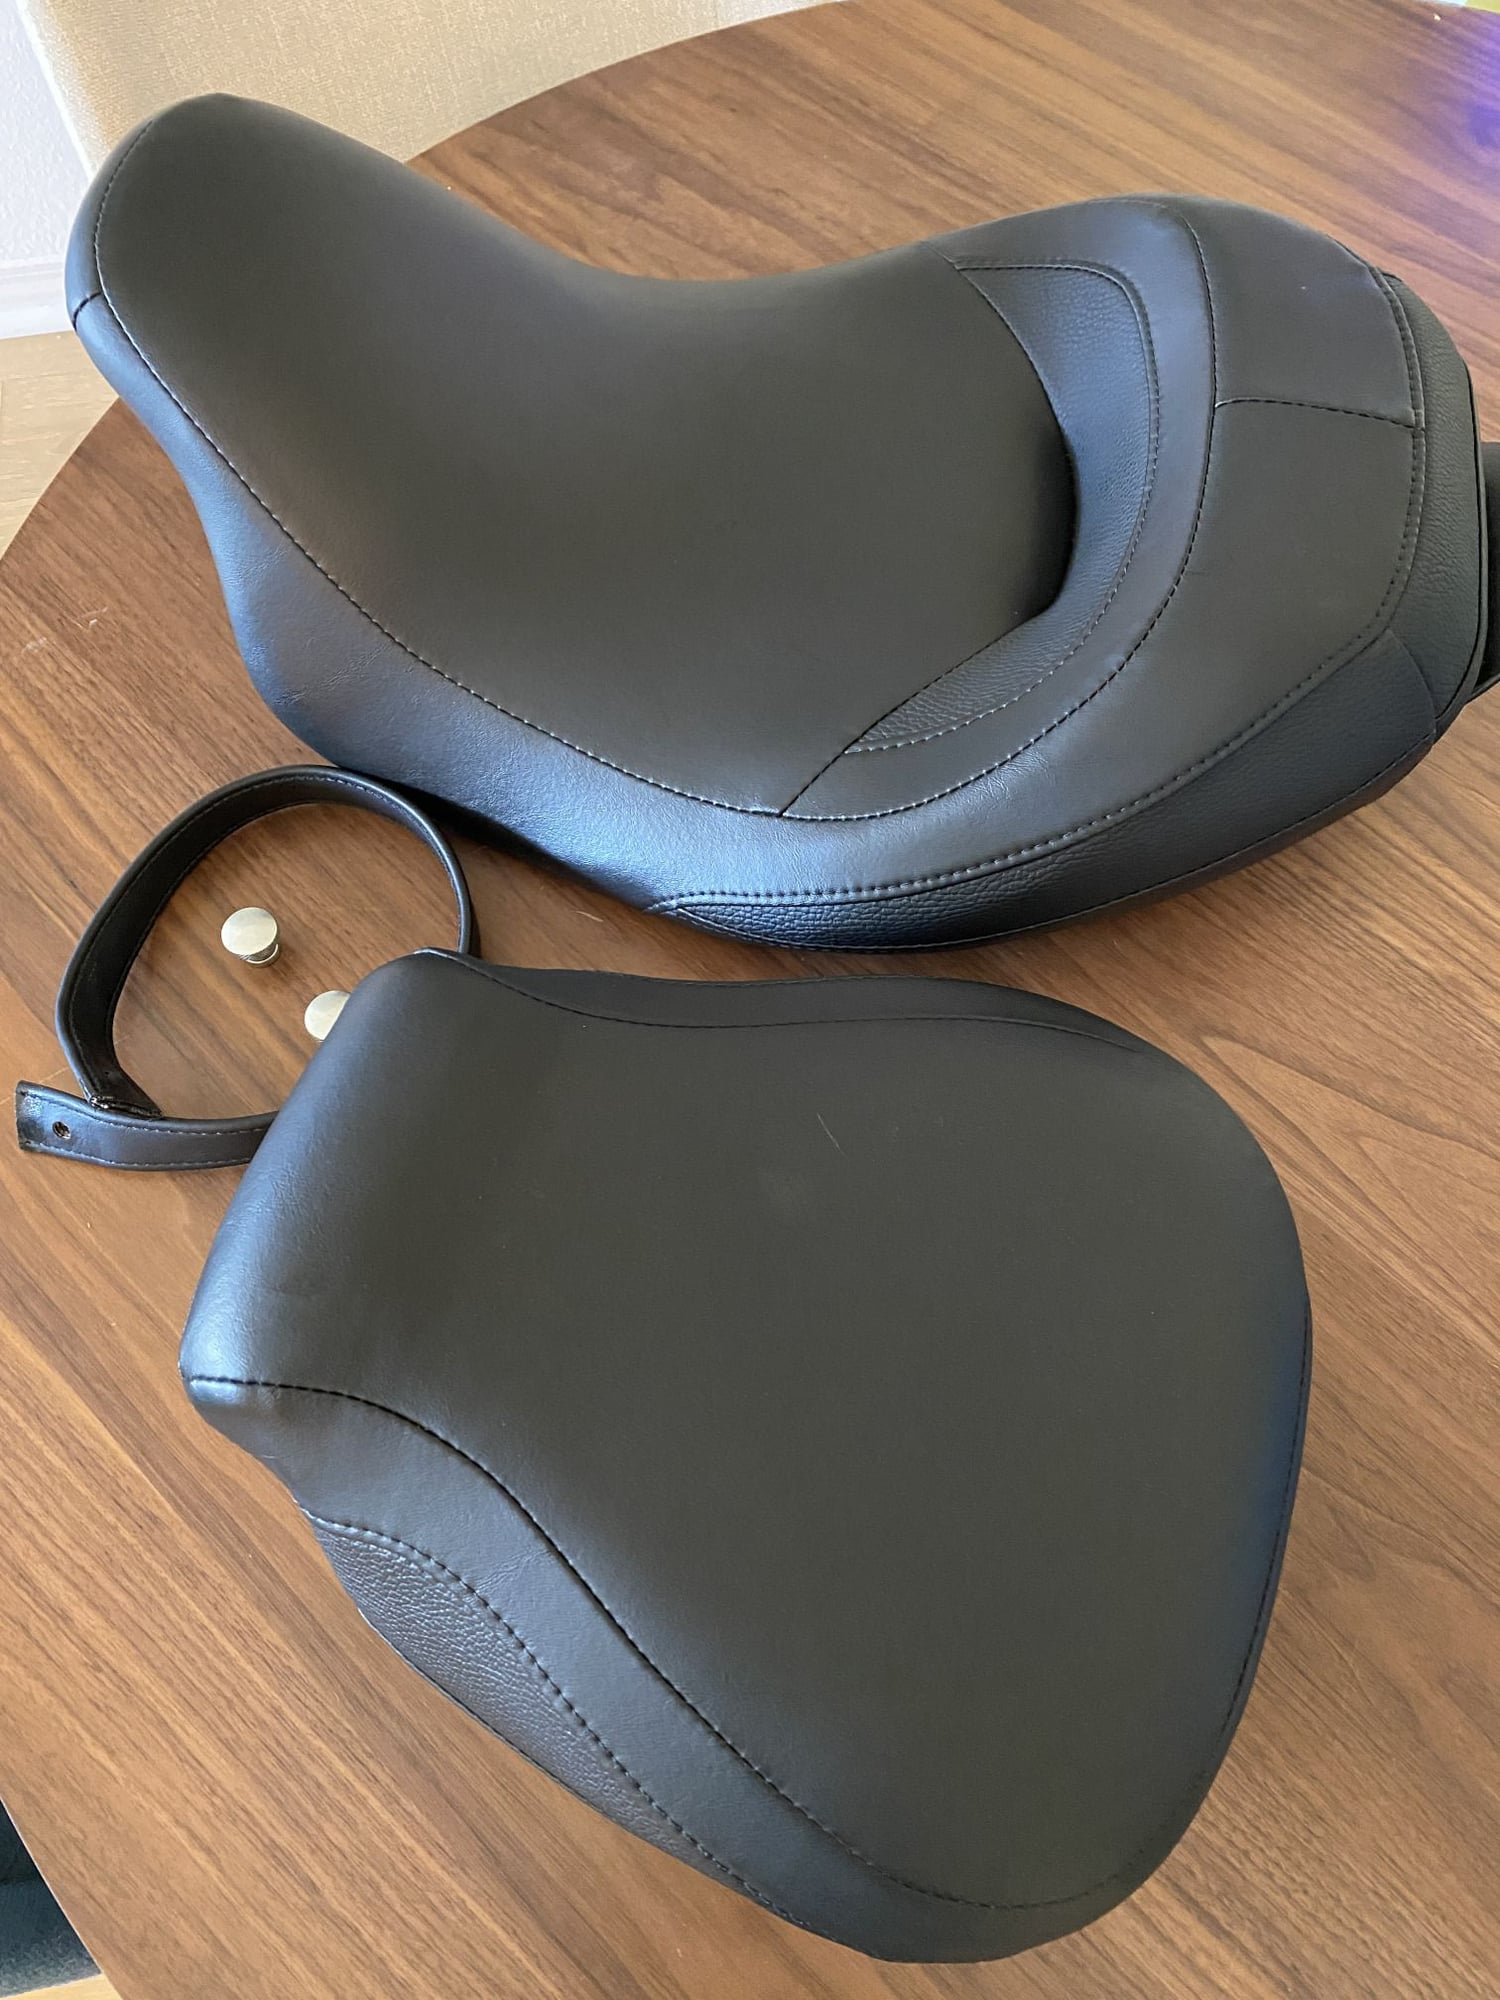 HD Low Profile Seat and Pillion - Harley Davidson Forums